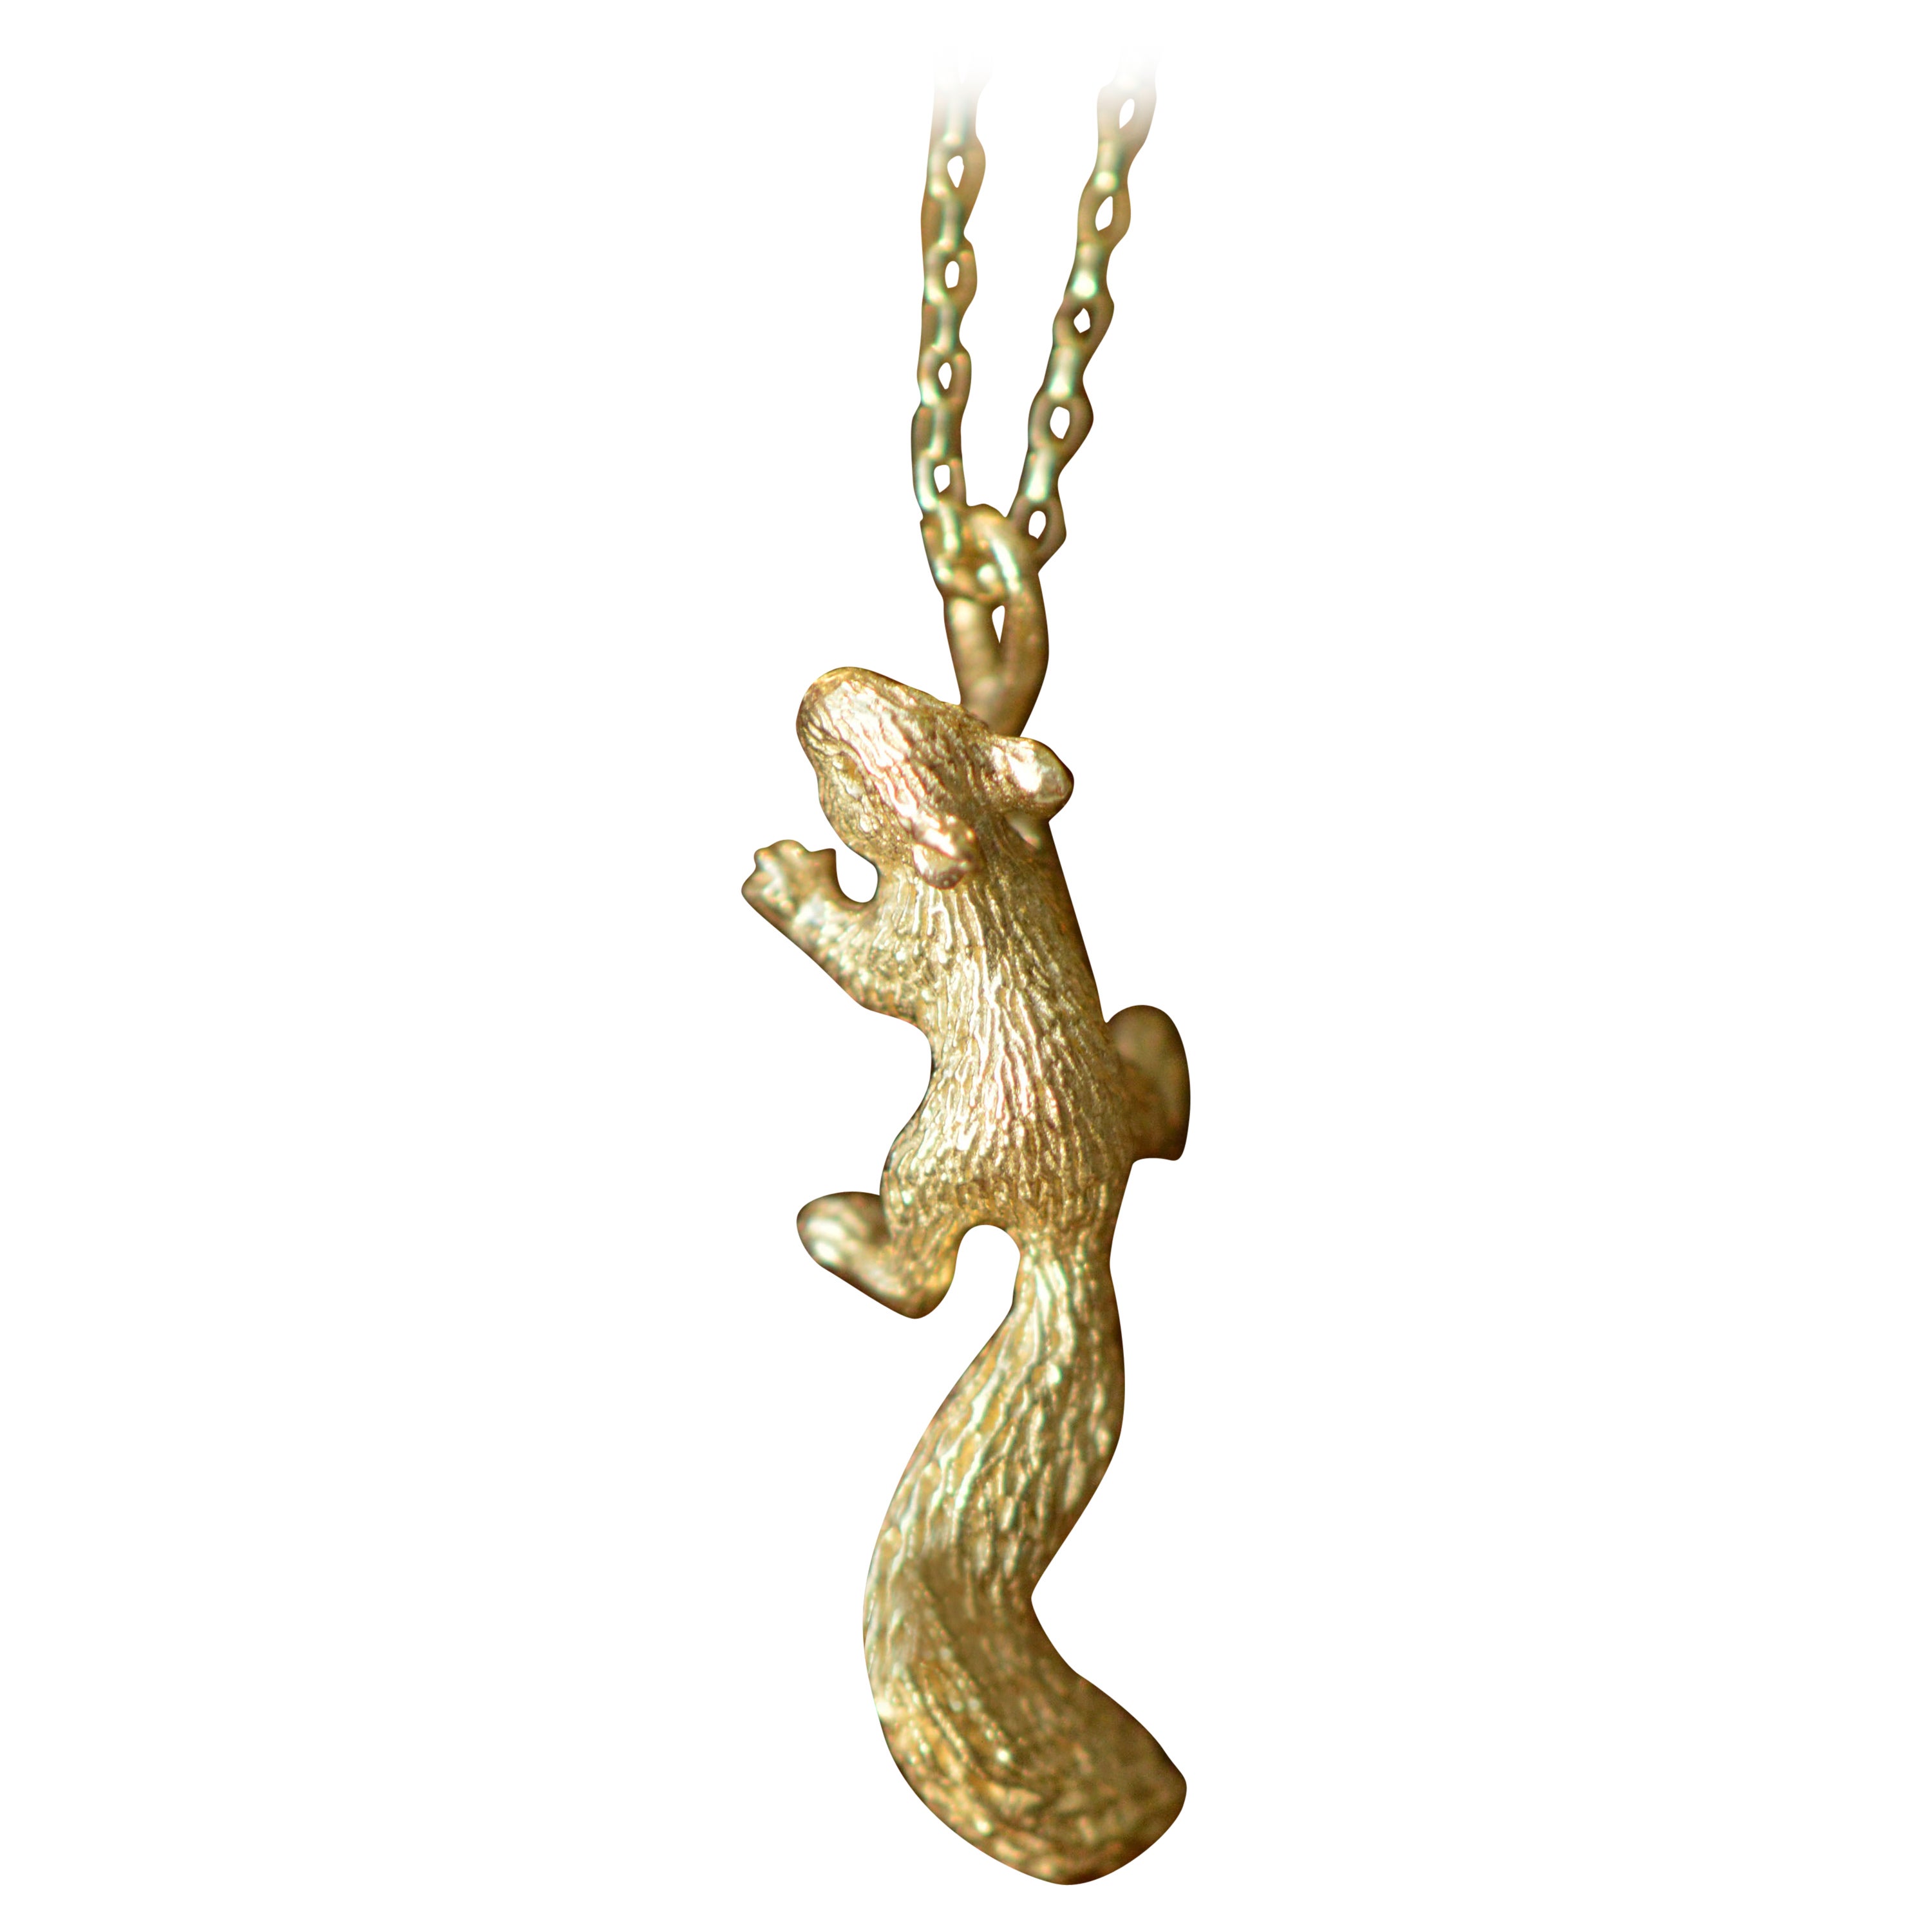 Solid 18 Carat Gold Baby Squirrel Pendant By Lucy Stopes-Roe